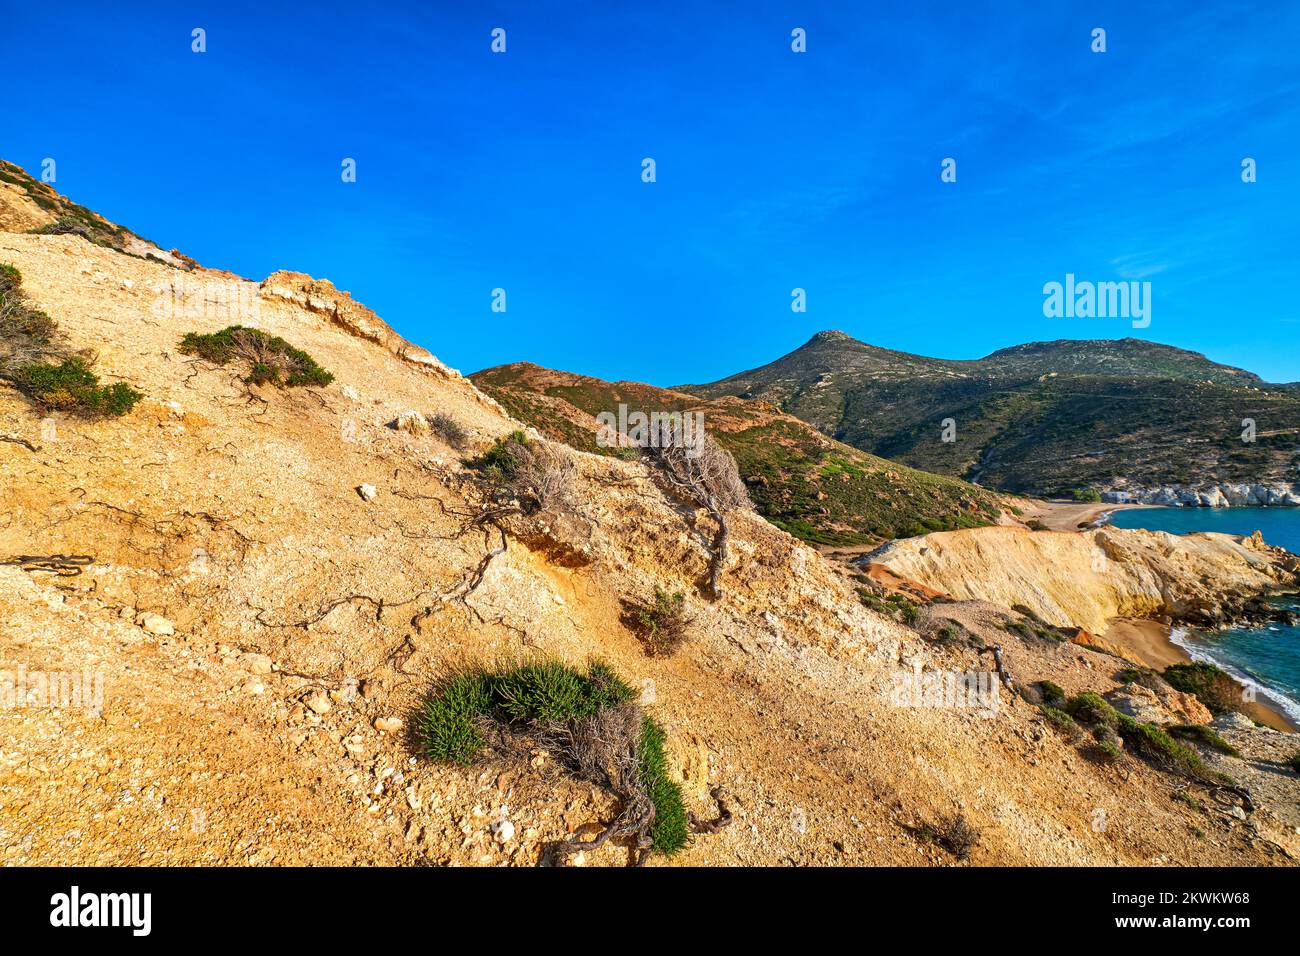 Natural rock formations of yellow cliffs on low sunlight, Milos, Greece. Weather-shaped slopes of rocks on Agios Ioannis beach at clear blue sky. Stock Photo